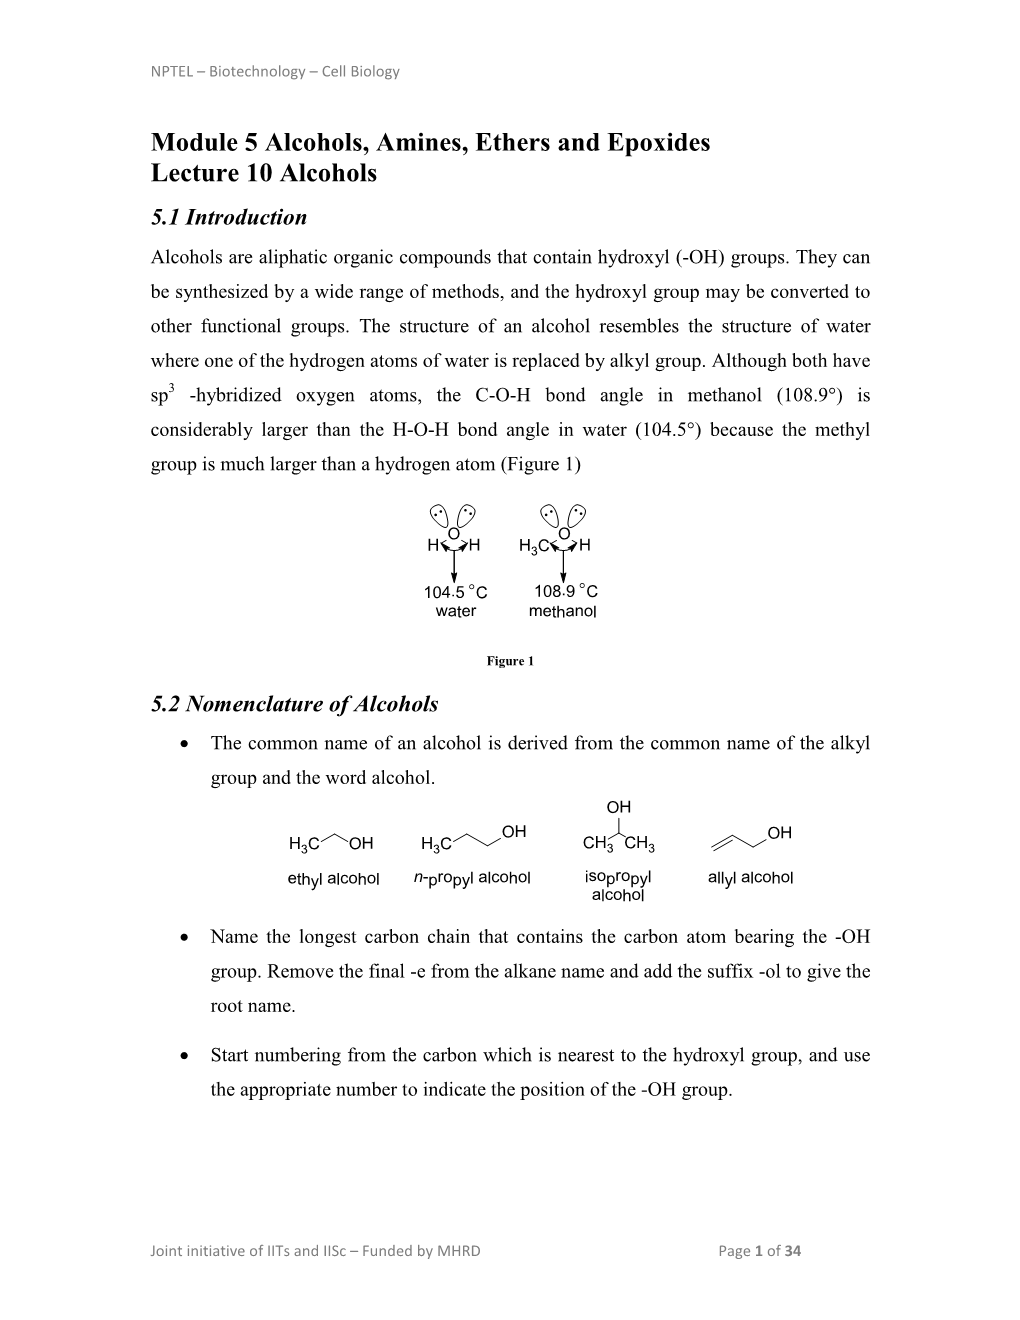 Module 5 Alcohols, Amines, Ethers and Epoxides Lecture 10 Alcohols 5.1 Introduction Alcohols Are Aliphatic Organic Compounds That Contain Hydroxyl (-OH) Groups